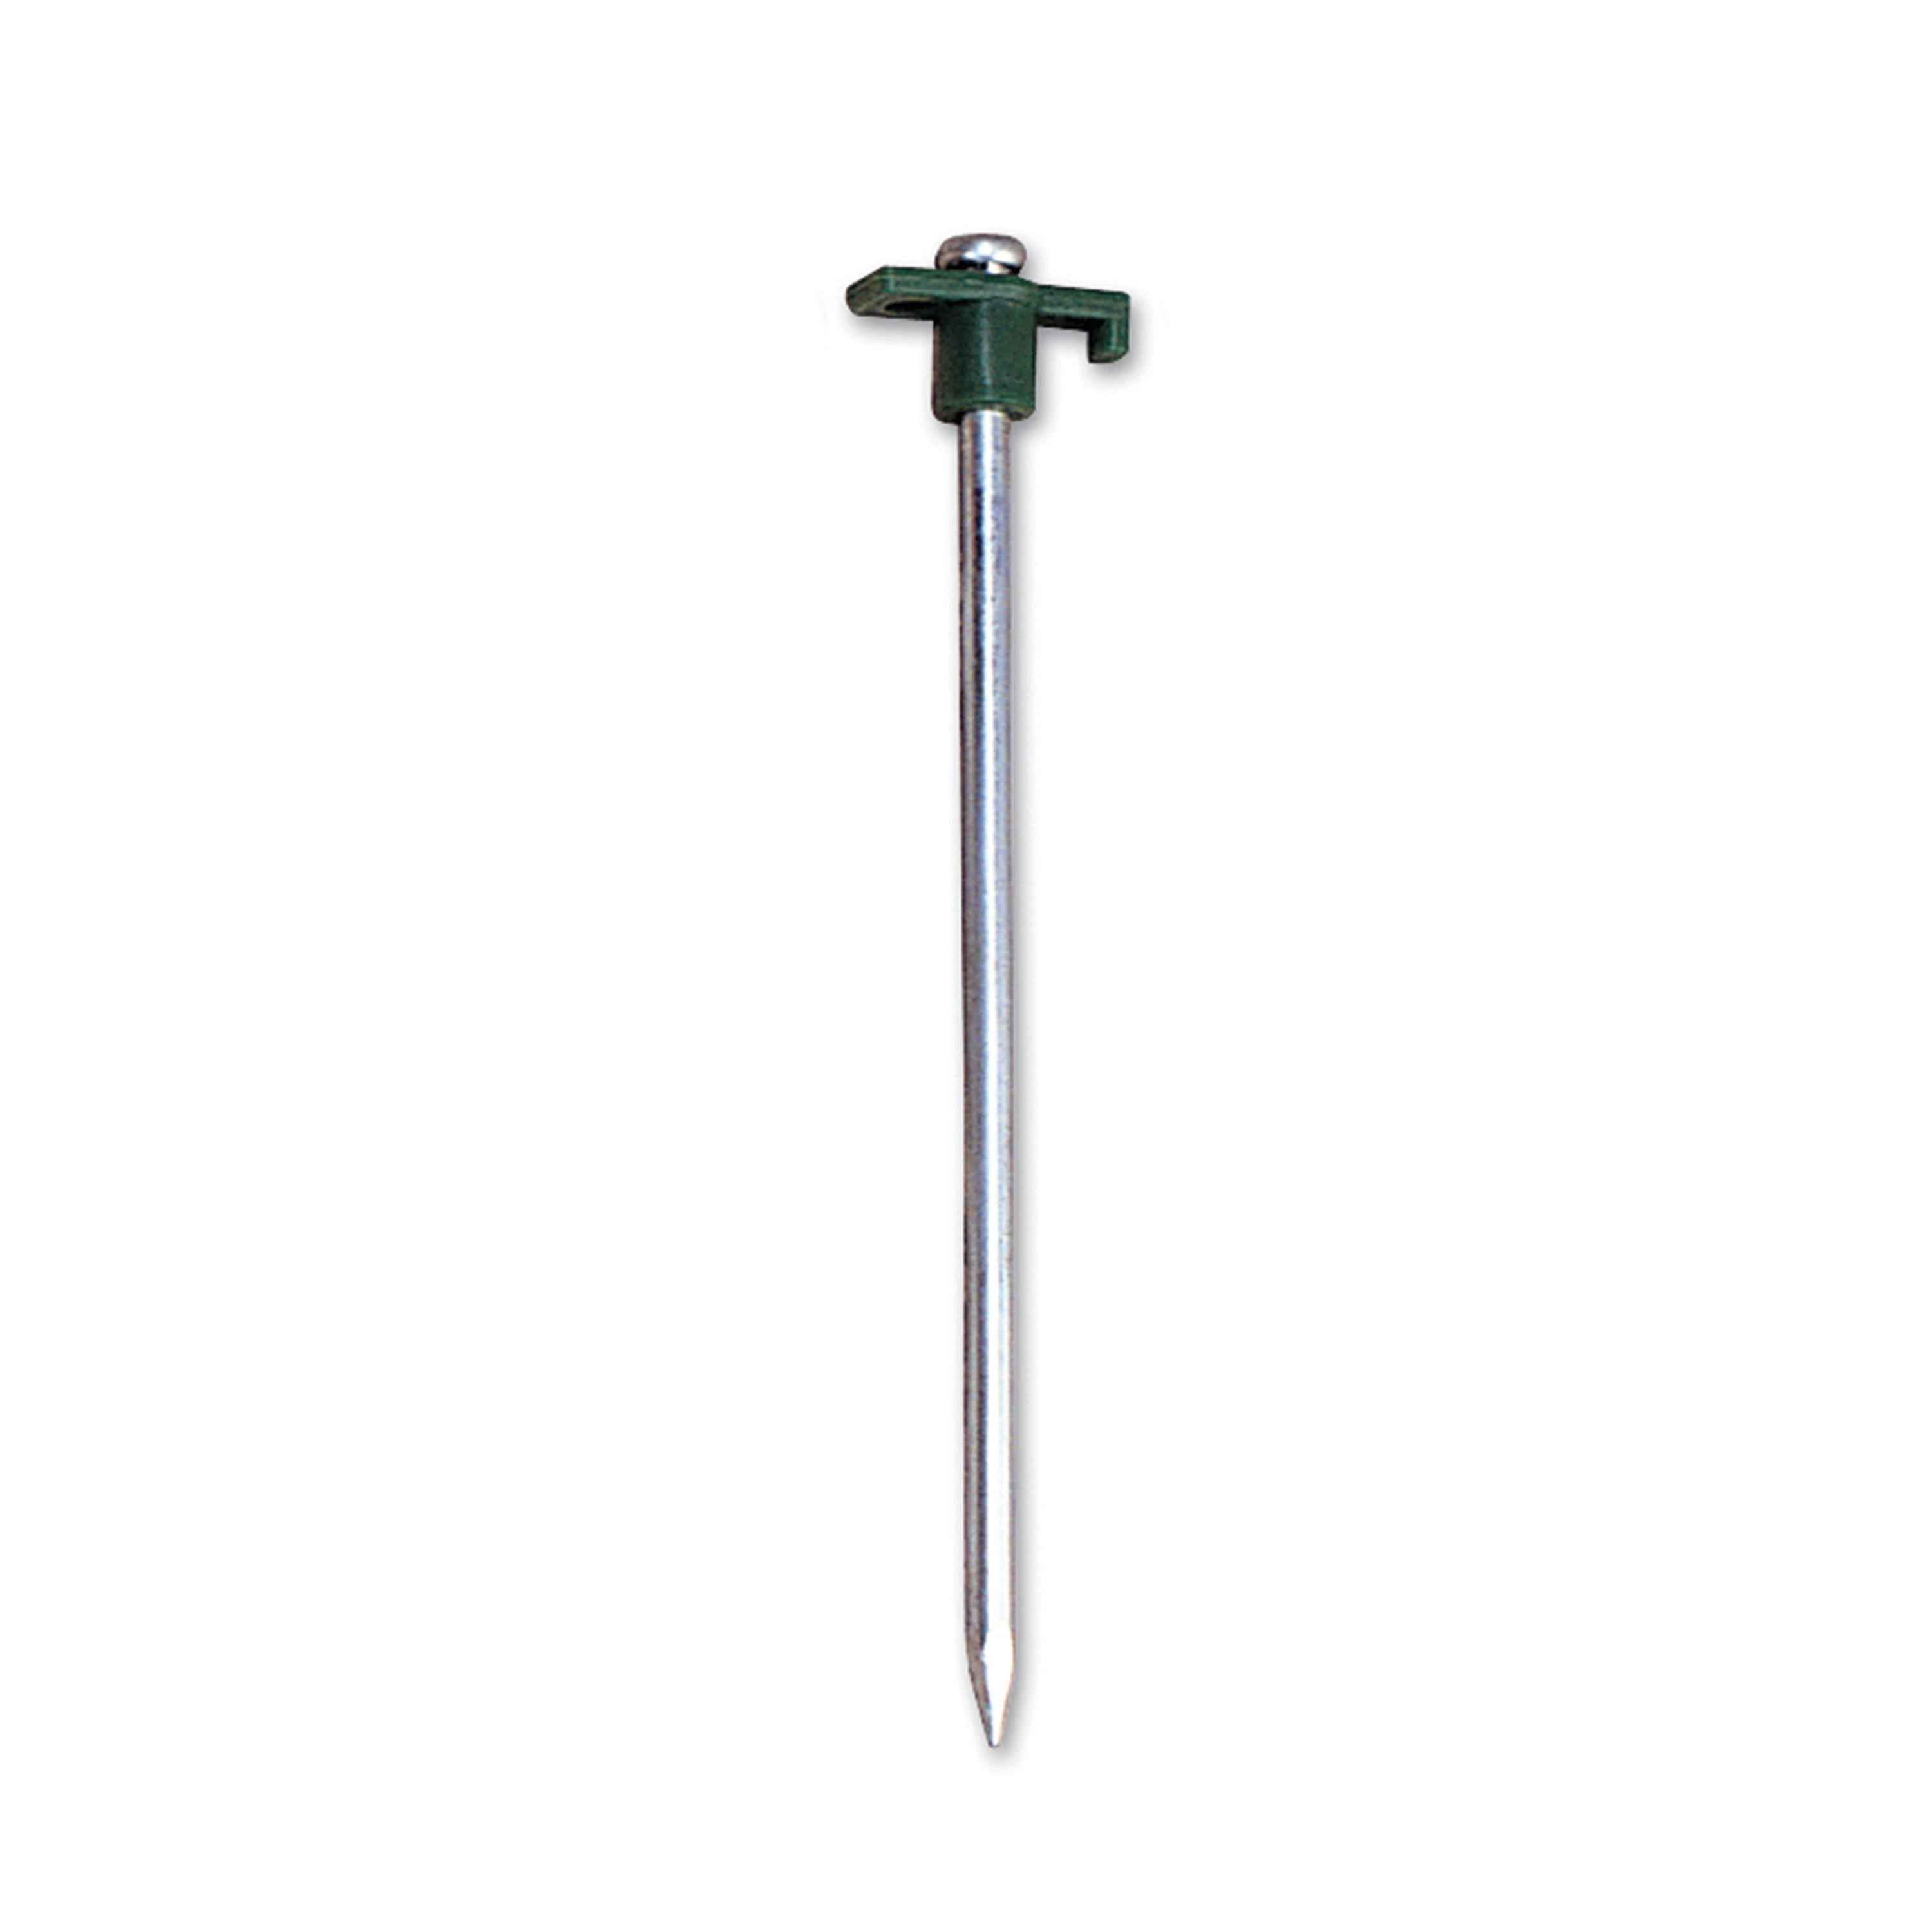 Nail Stake With T-Top - 50 Pack-eSafety Supplies, Inc